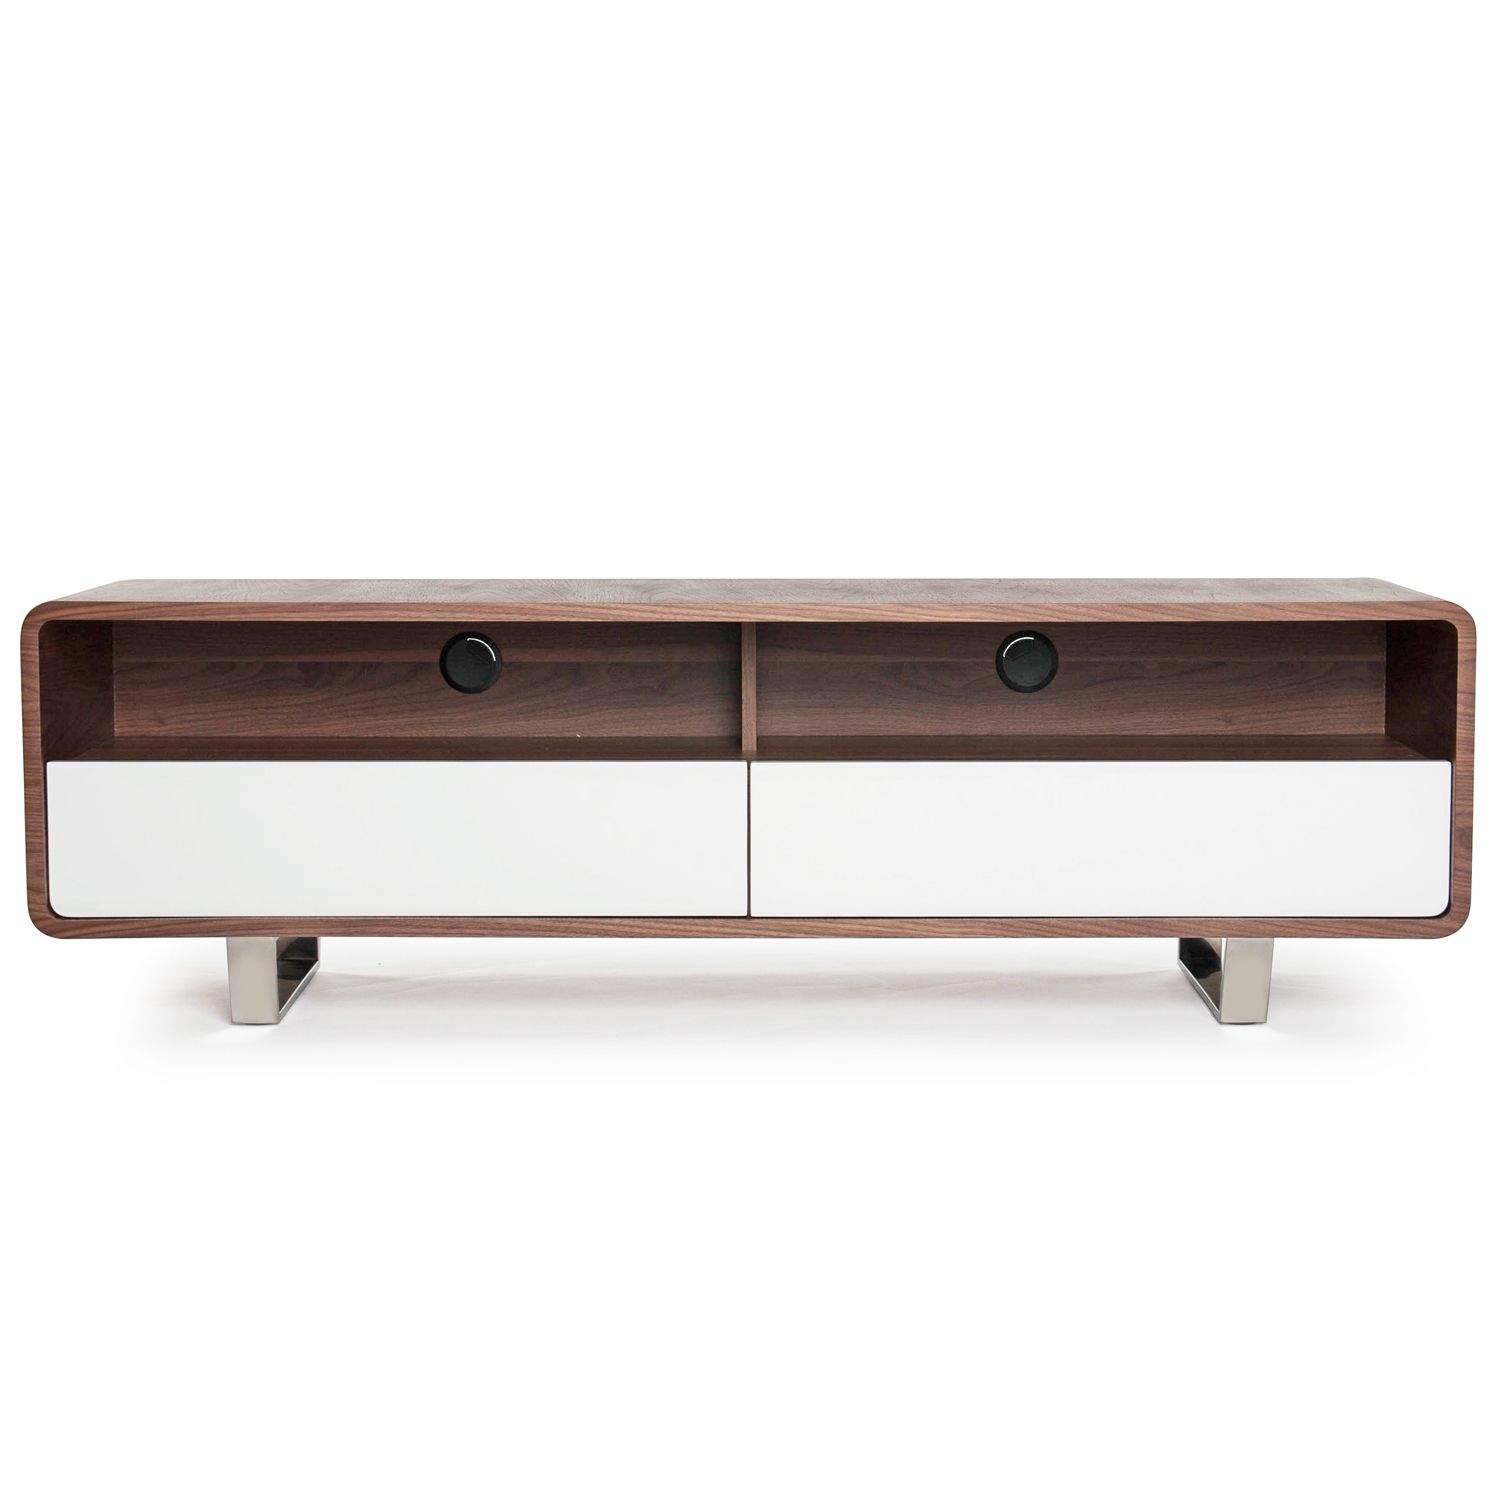 Preferred Contemporary Wood Tv Stands Regarding Modern Low Platform Tv Stand In Walnut And White (View 11 of 20)